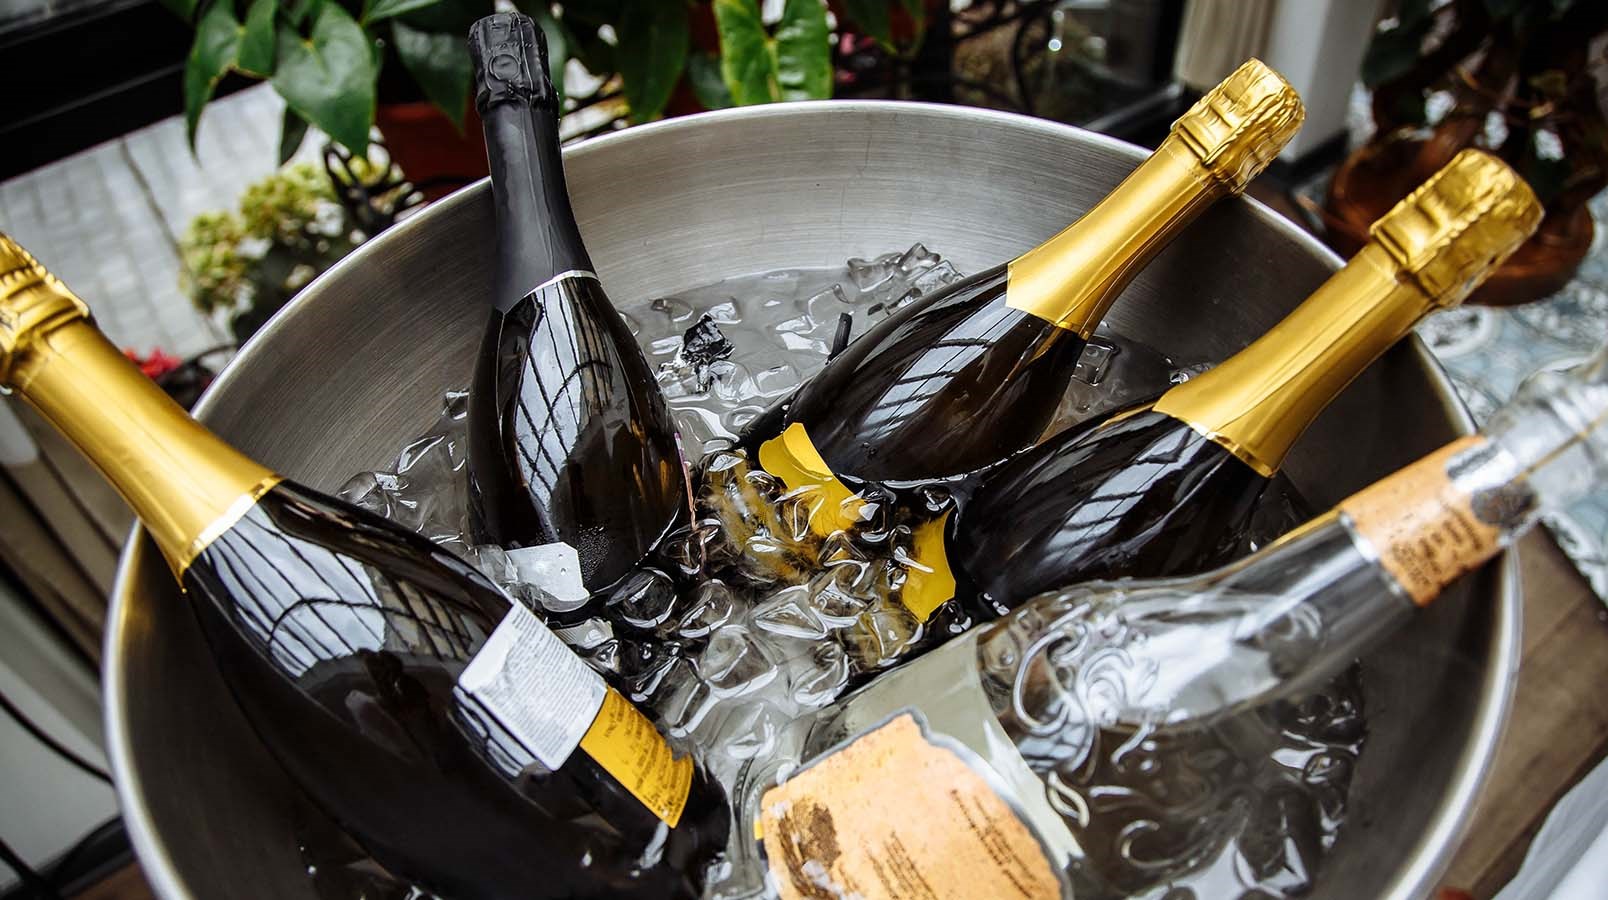 Best sparkling wine for Christmas 2023, from champagne to prosecco